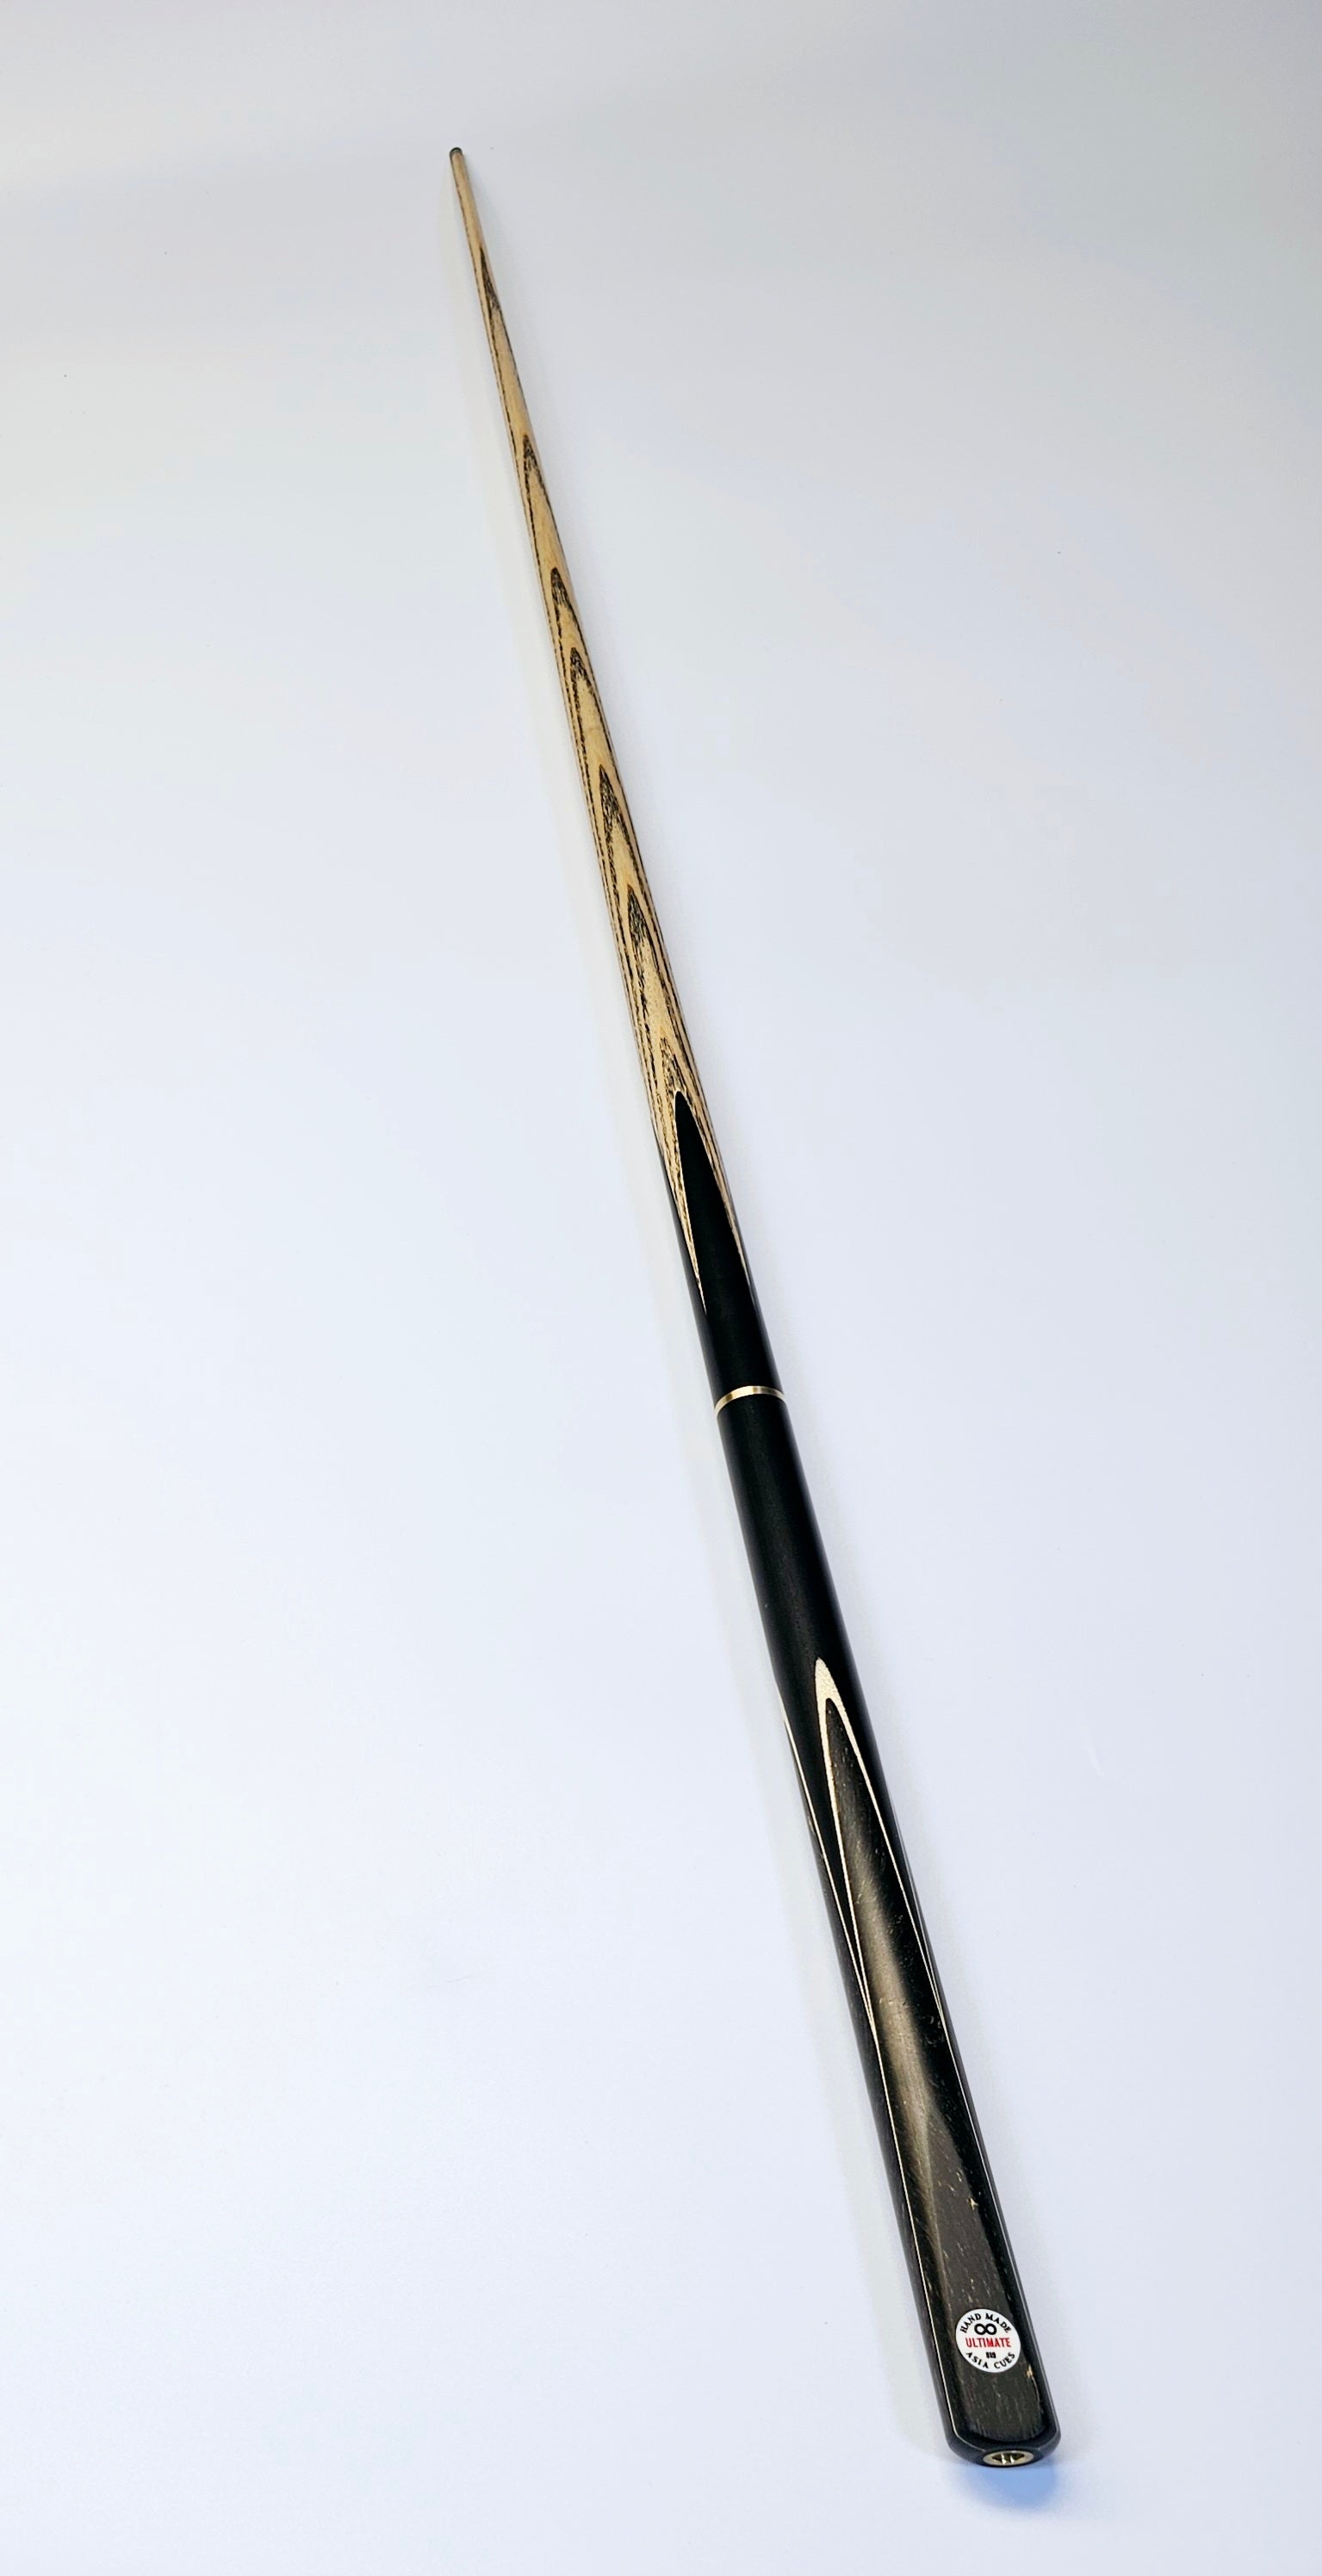 Asia Cues Ultimate No.819  - 3/4 Jointed Snooker Cue 9.4mm Tip, 18.3oz, 58"